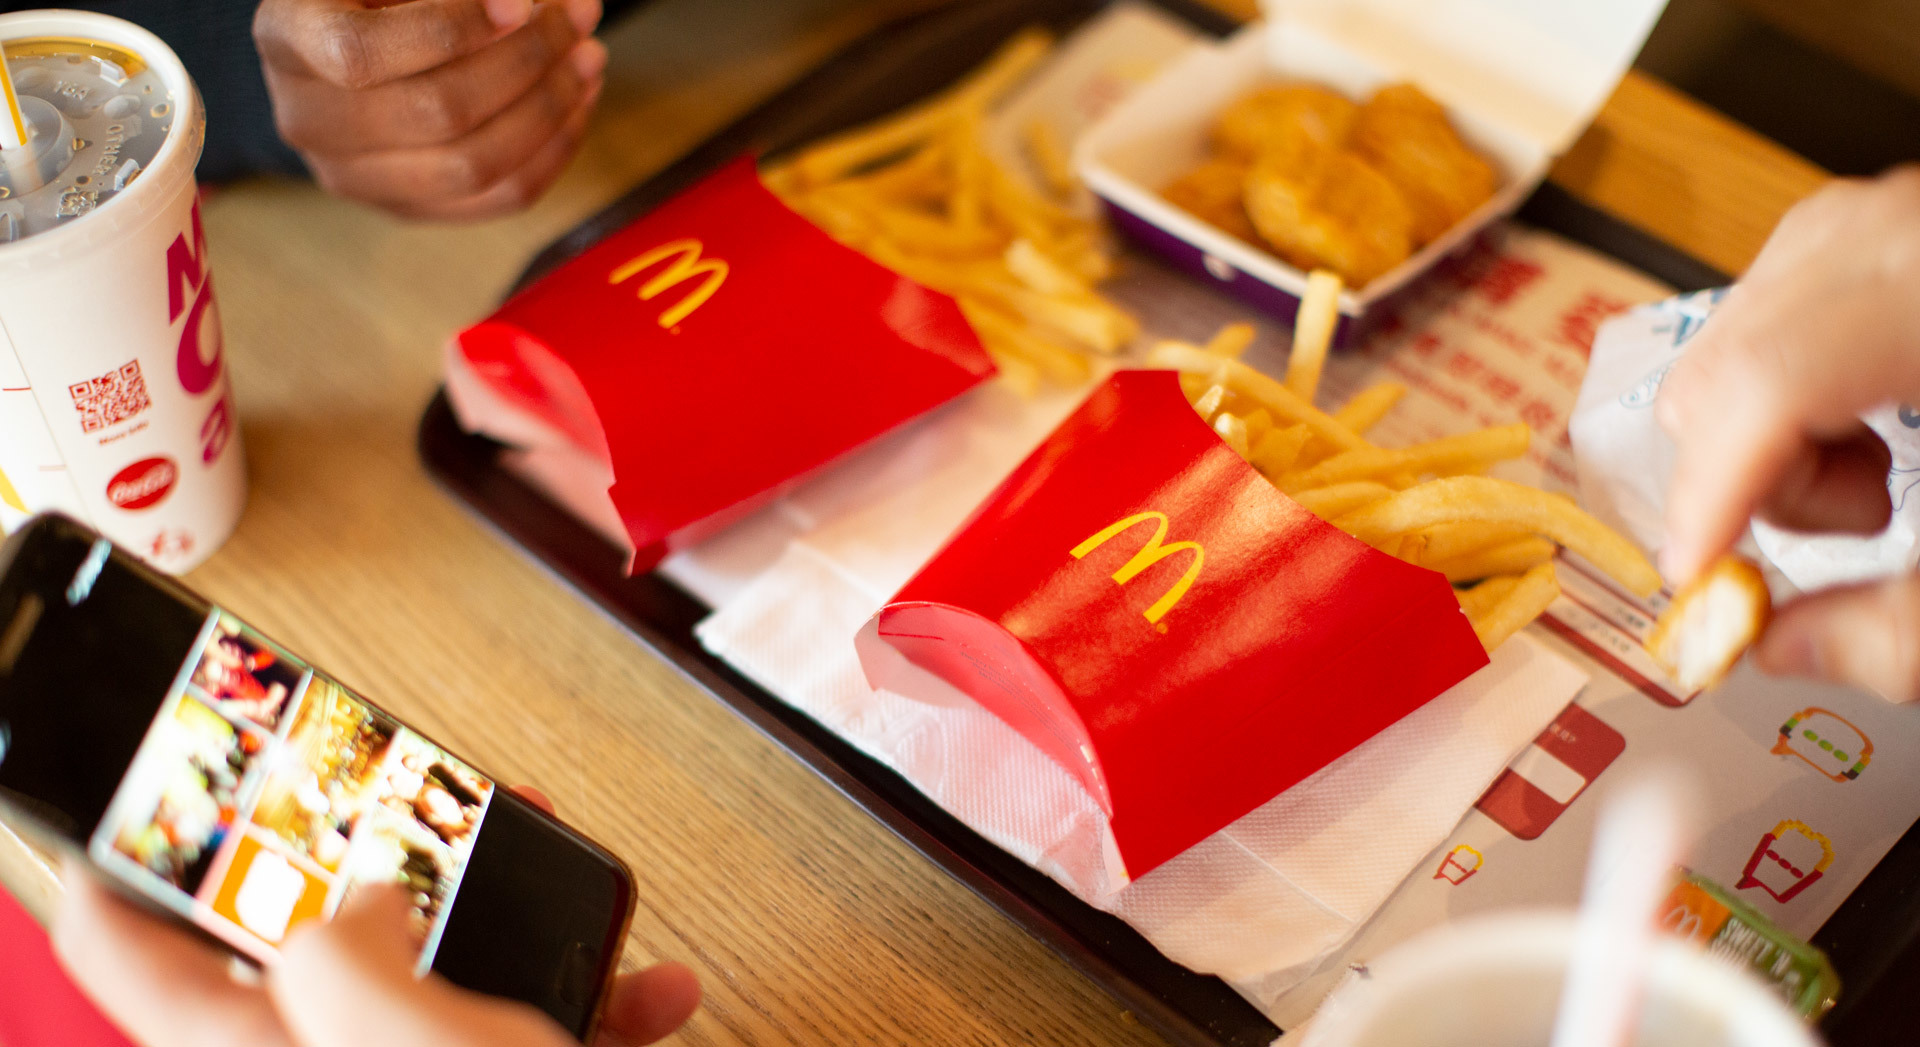 Know Our Food - Do McDonald's add sugar to their fries?